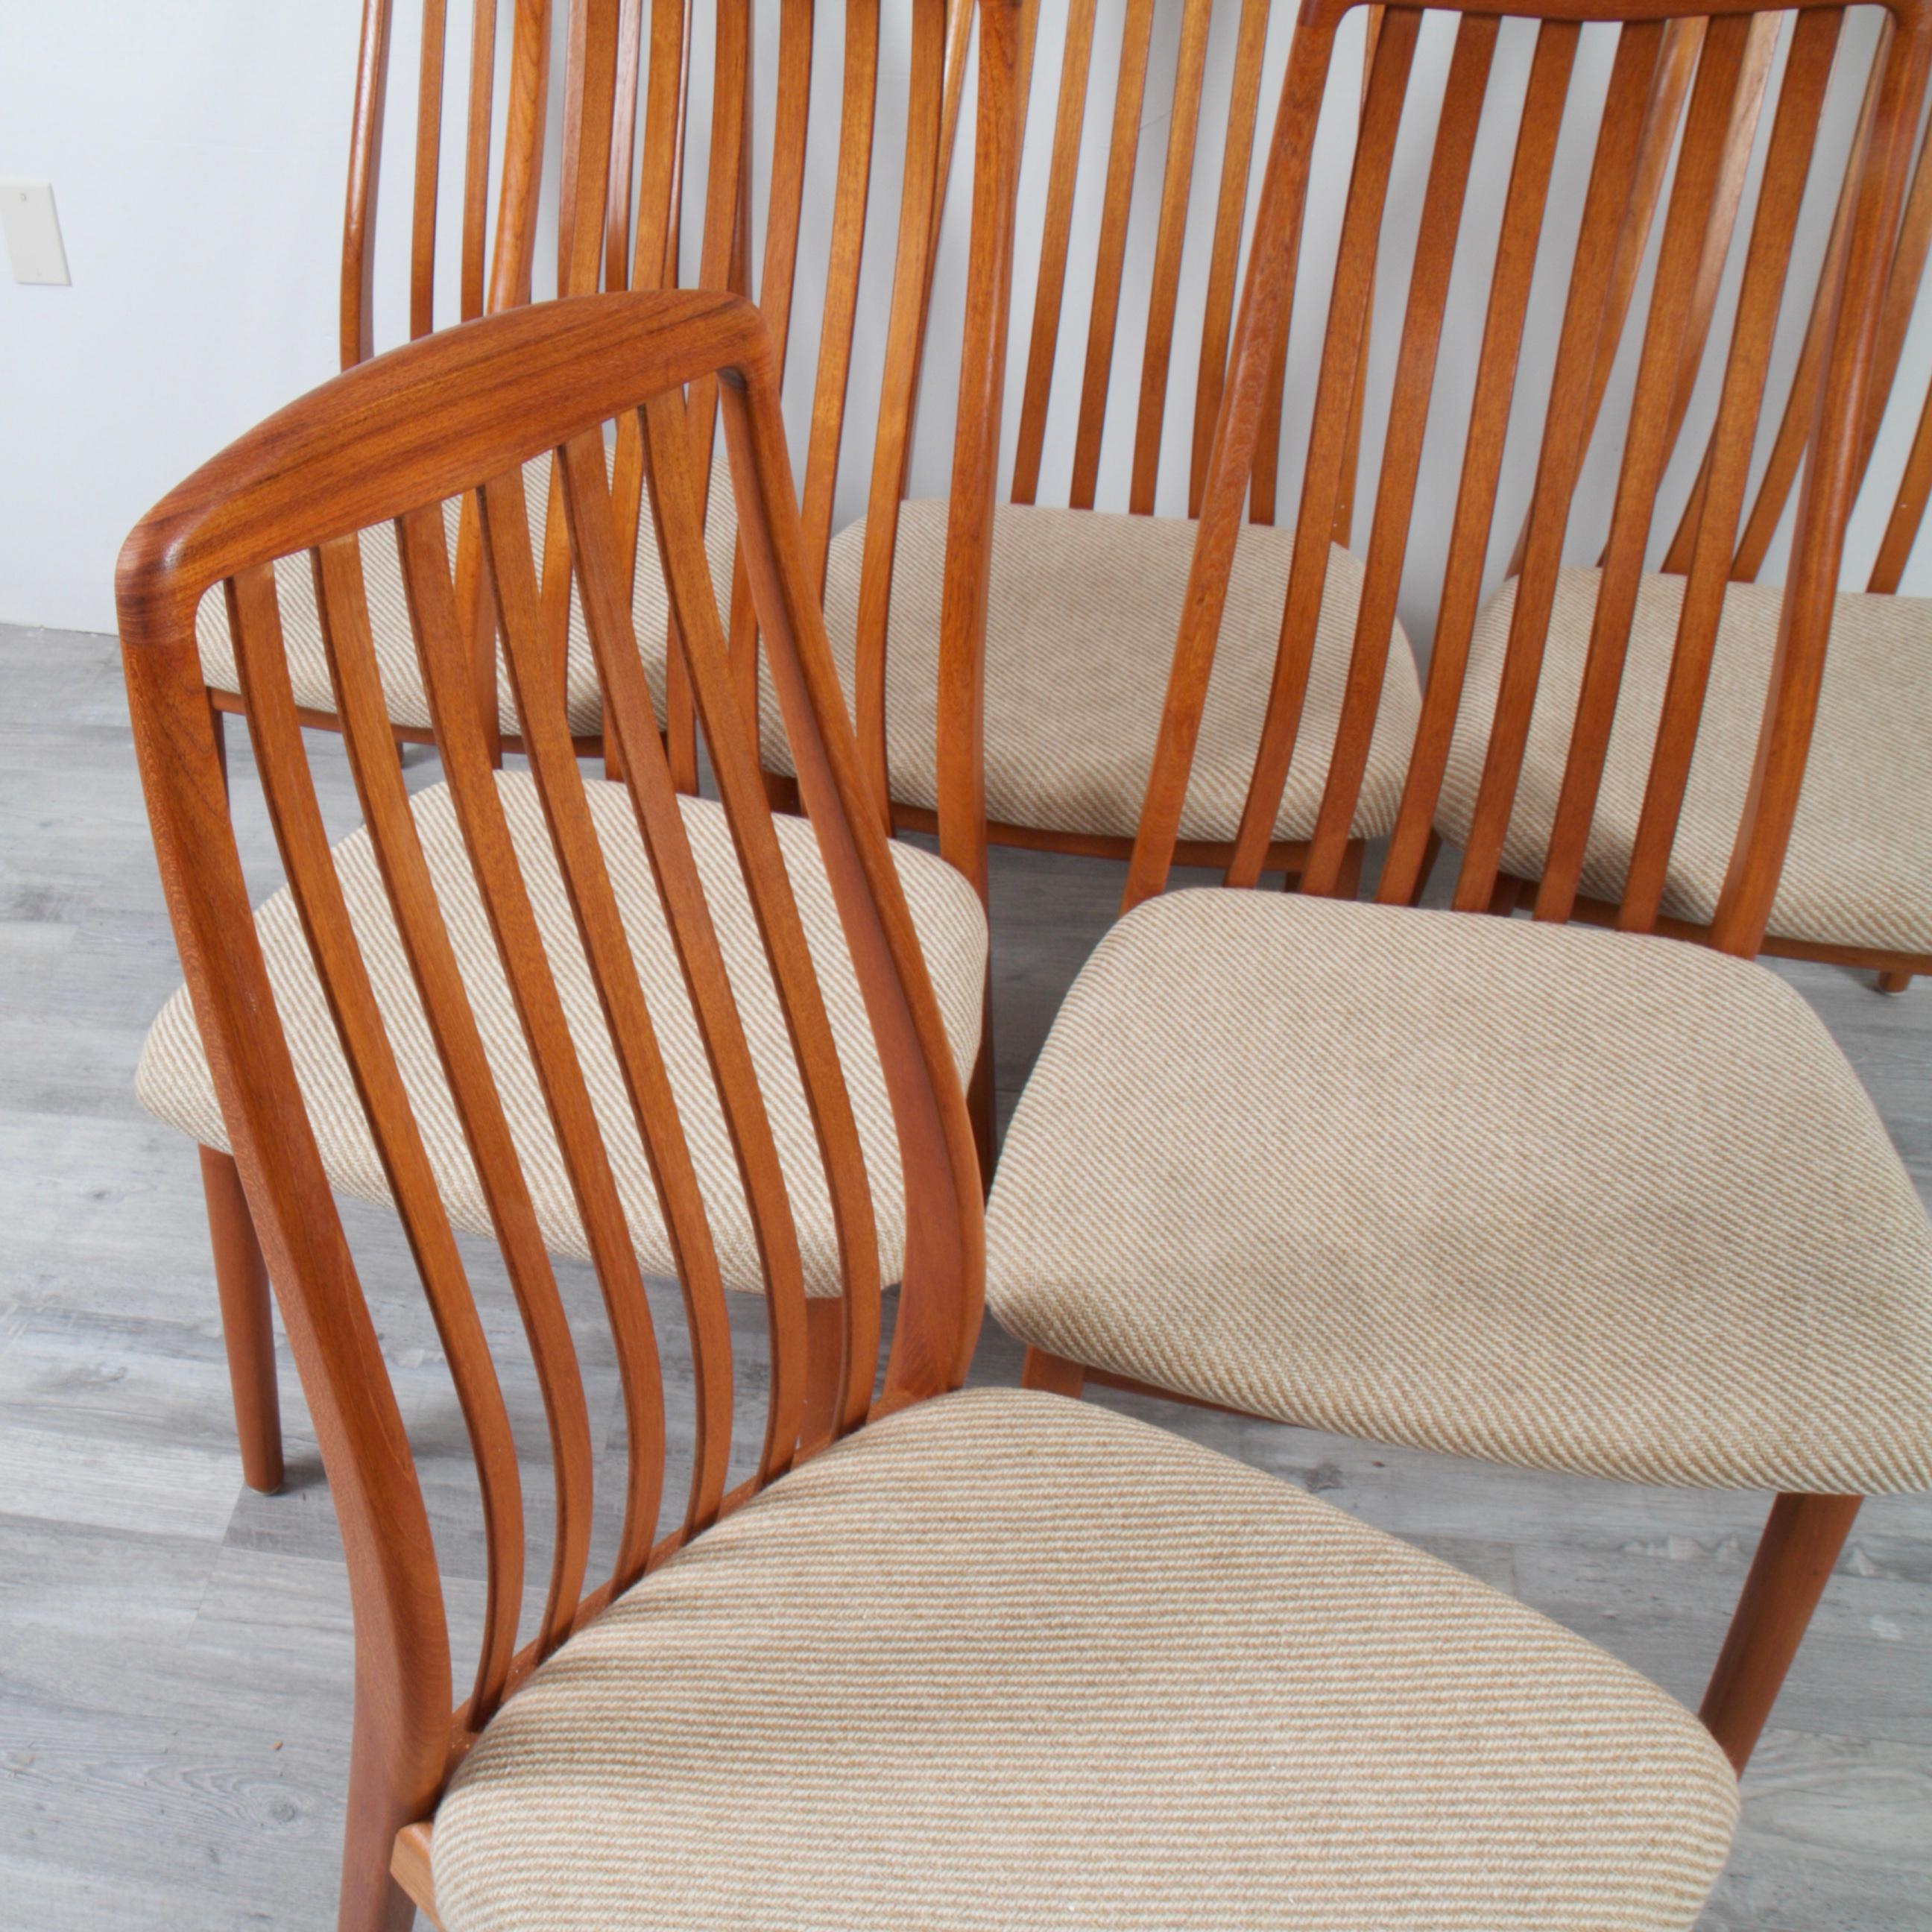 This is a 1960s vintage set of solid teak dining chairs by Danish designer Benny Linden. Original upholstery is still clean, but would benefit from some updated fabric.